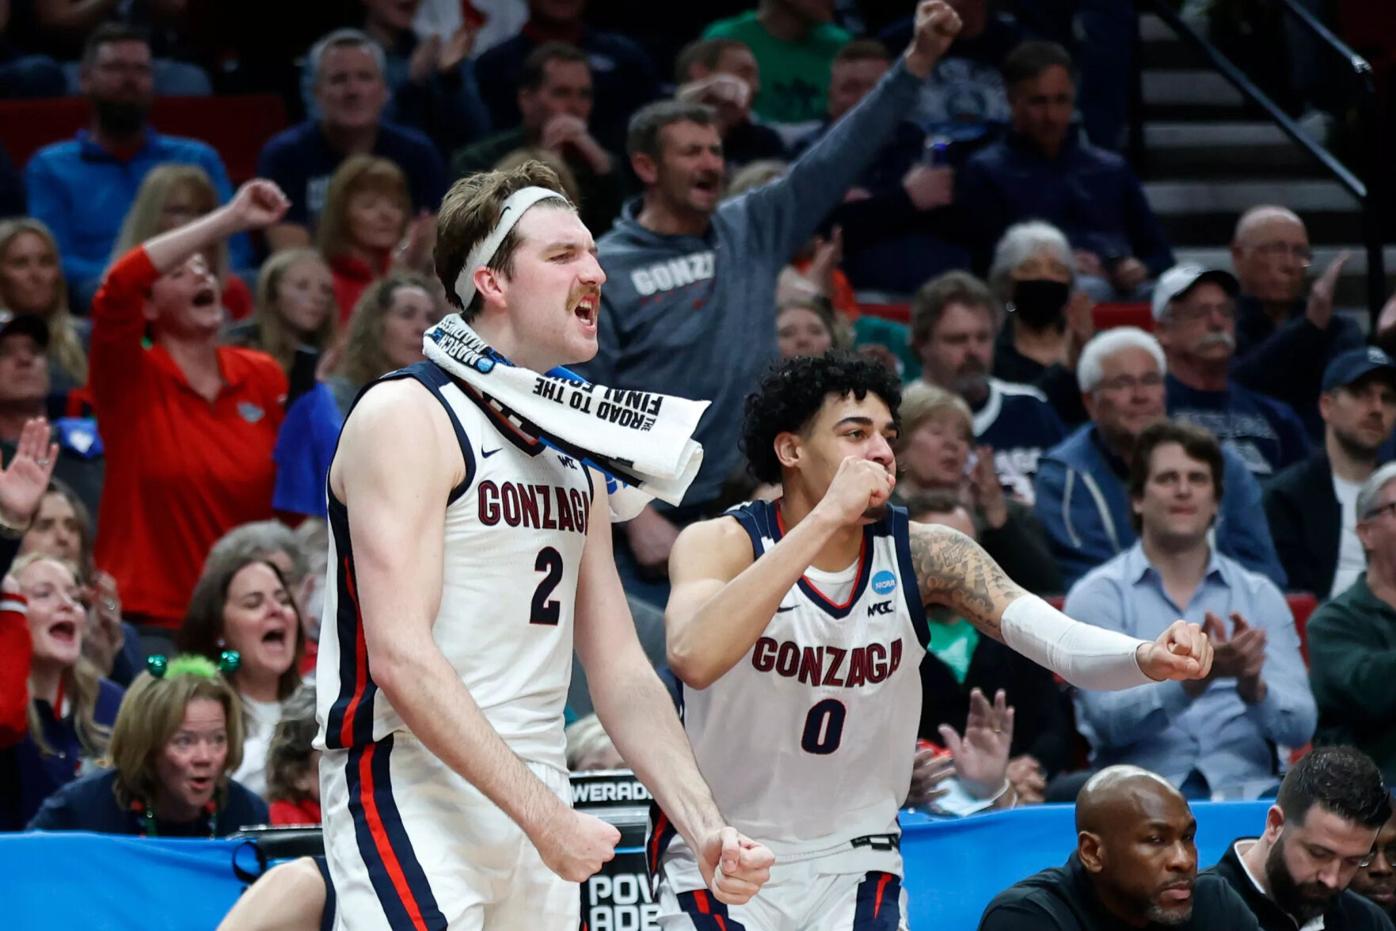 Gonzaga news: Drew Timme will leave school after 2022-23 season